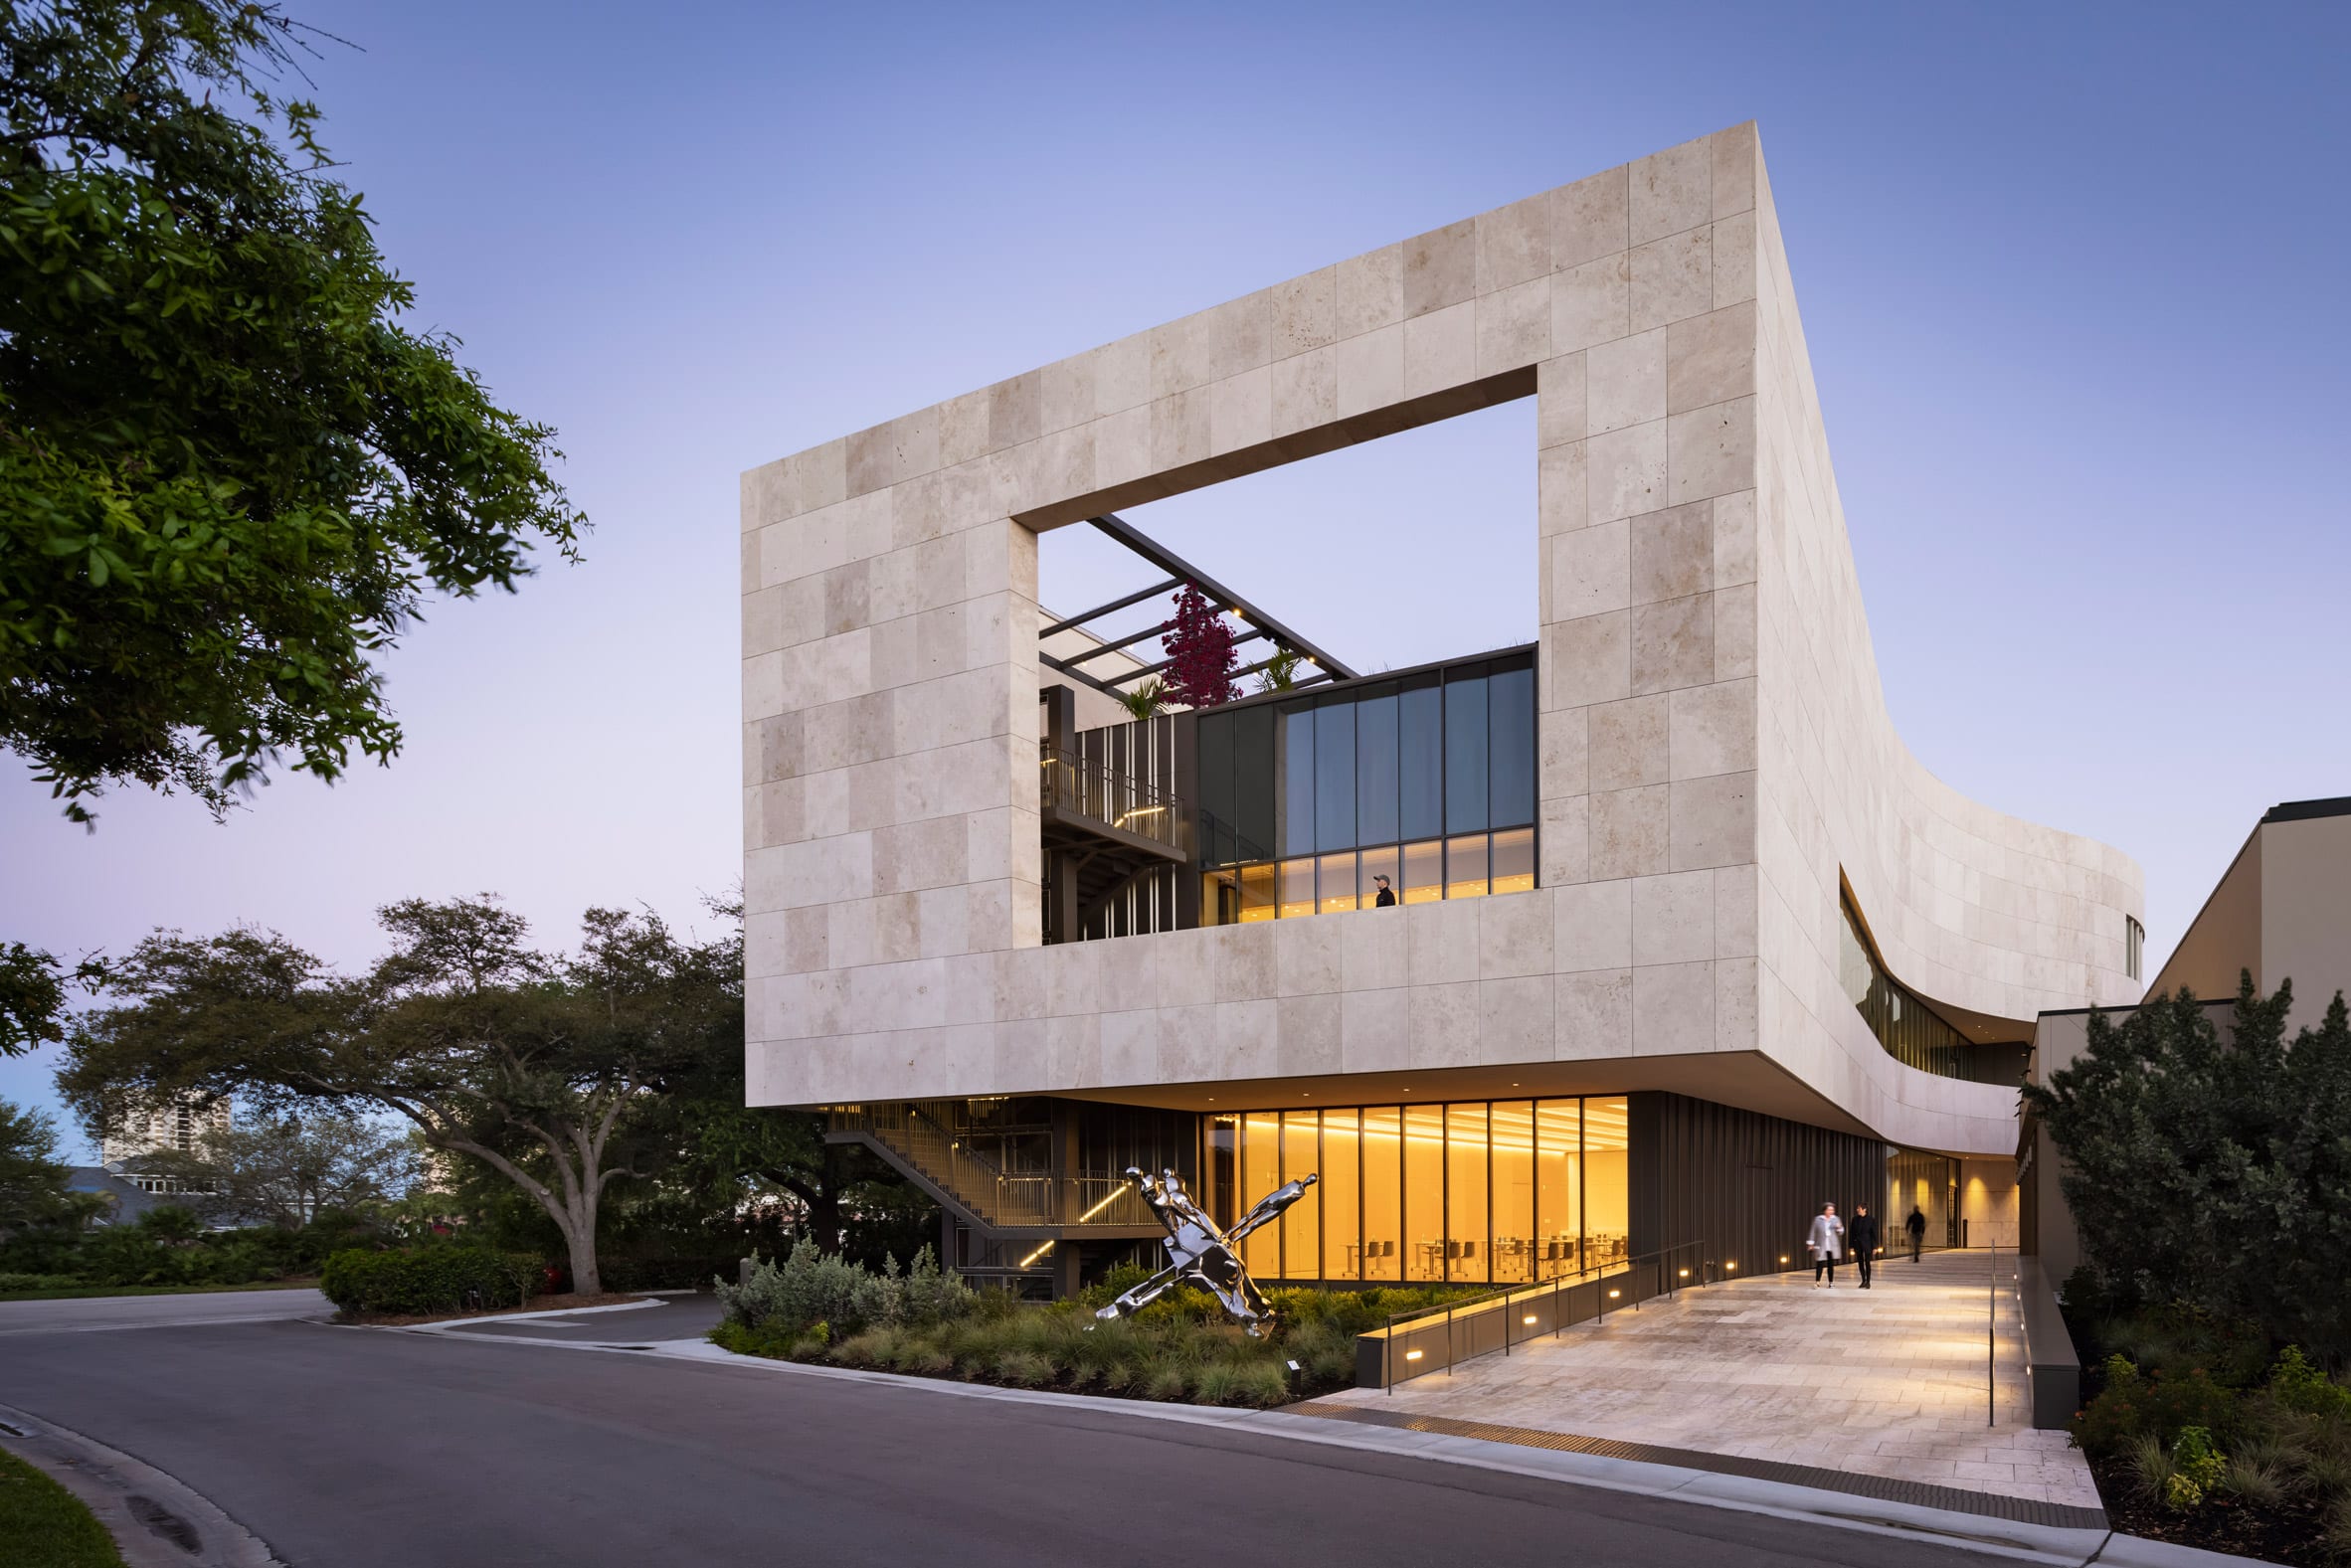 Hurricane-resistant glazing and limestone facade of an art museum in Florida